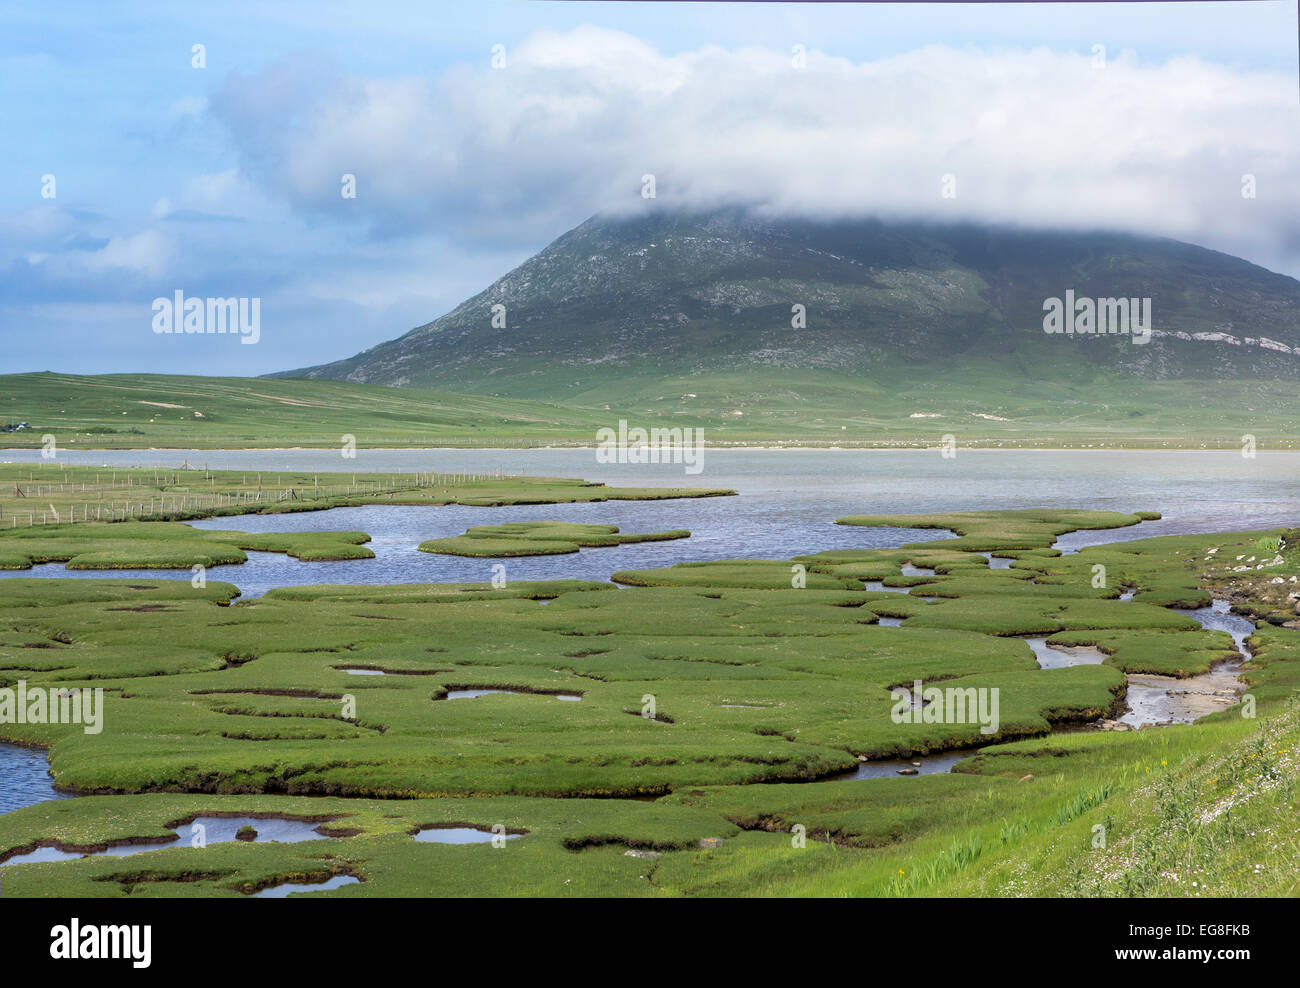 Ceapabhal hill and tital inlets or saltings at An Taobh Tuath or Northton on the Isle of Harris, Scotland. Stock Photo